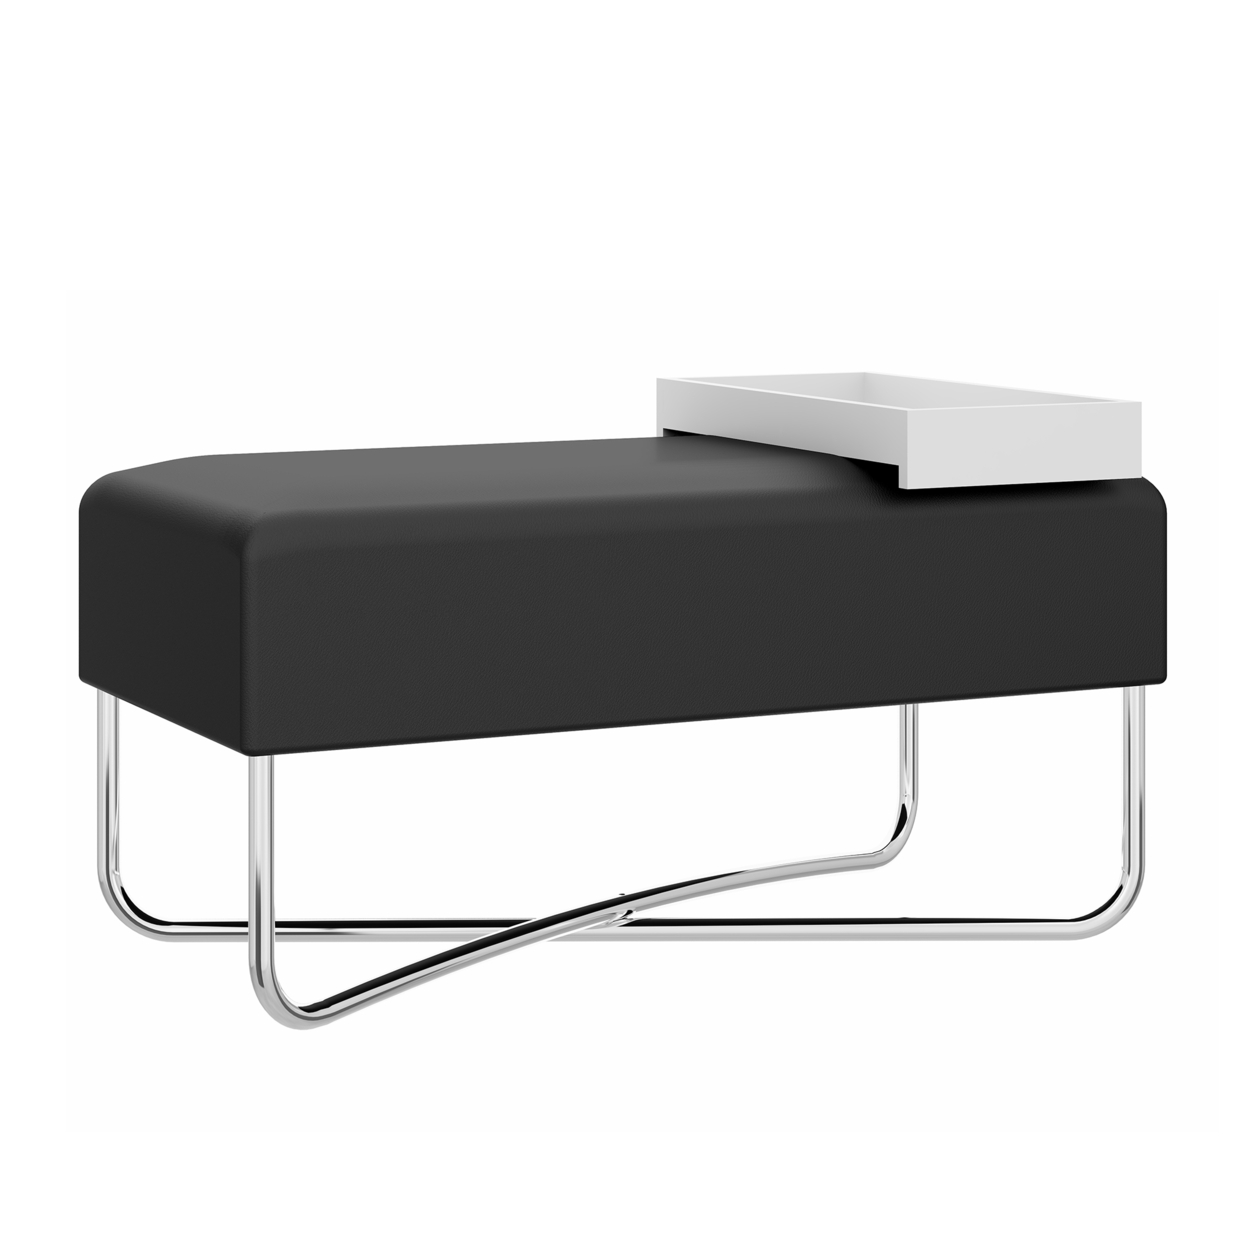 Pouffe With Rectangular Fabric Seat And Inbuilt Wooden Tray, Black And White- Saltoro Sherpi